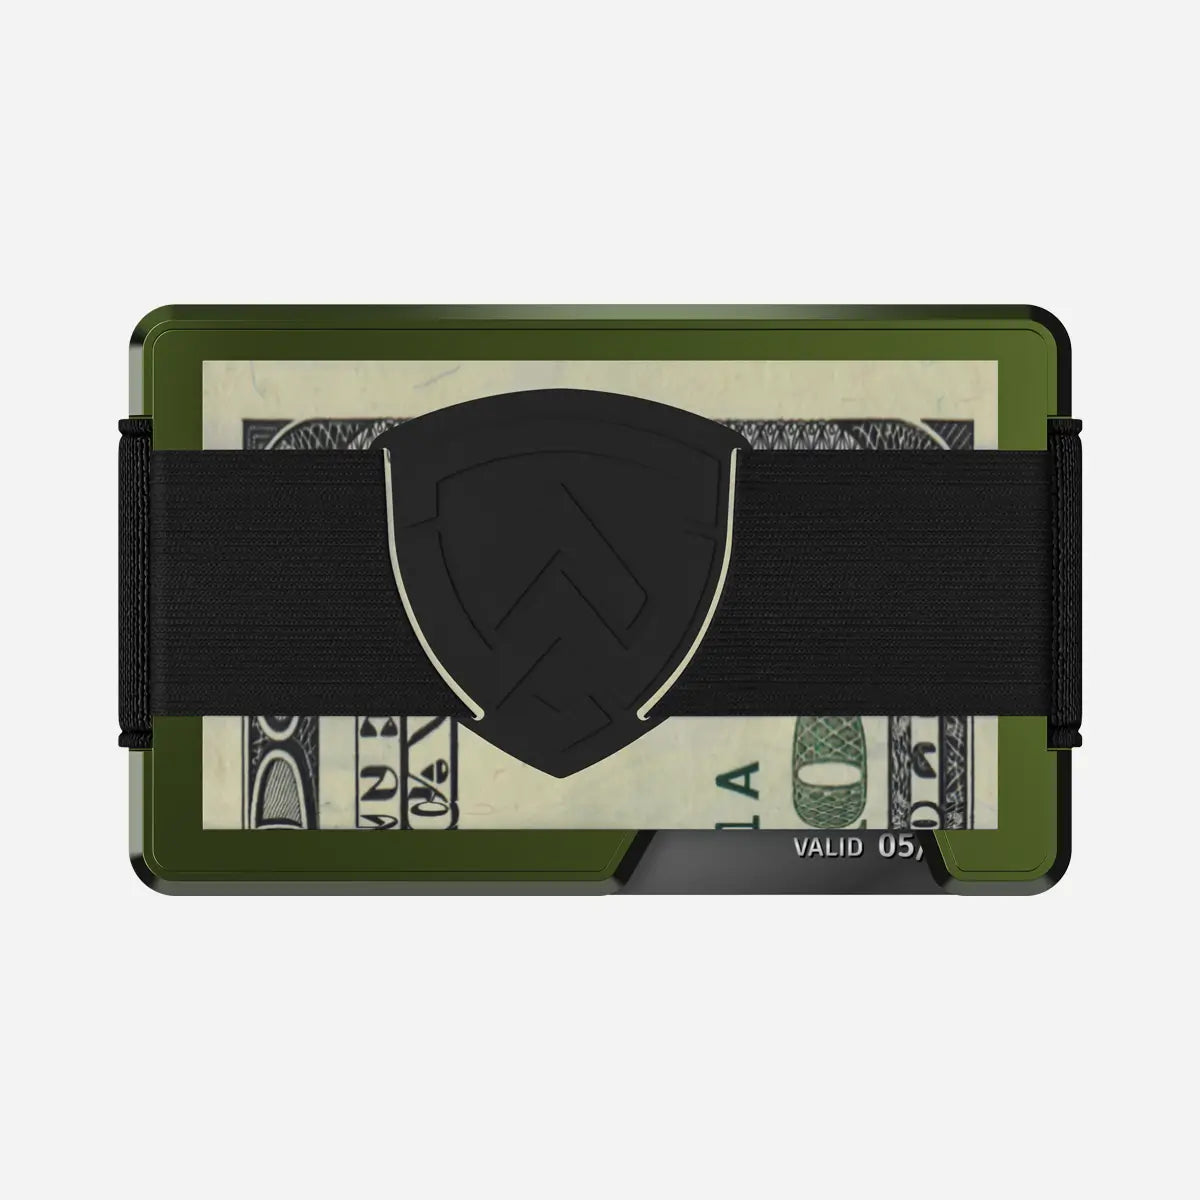 Axwell Wallet - Army Green